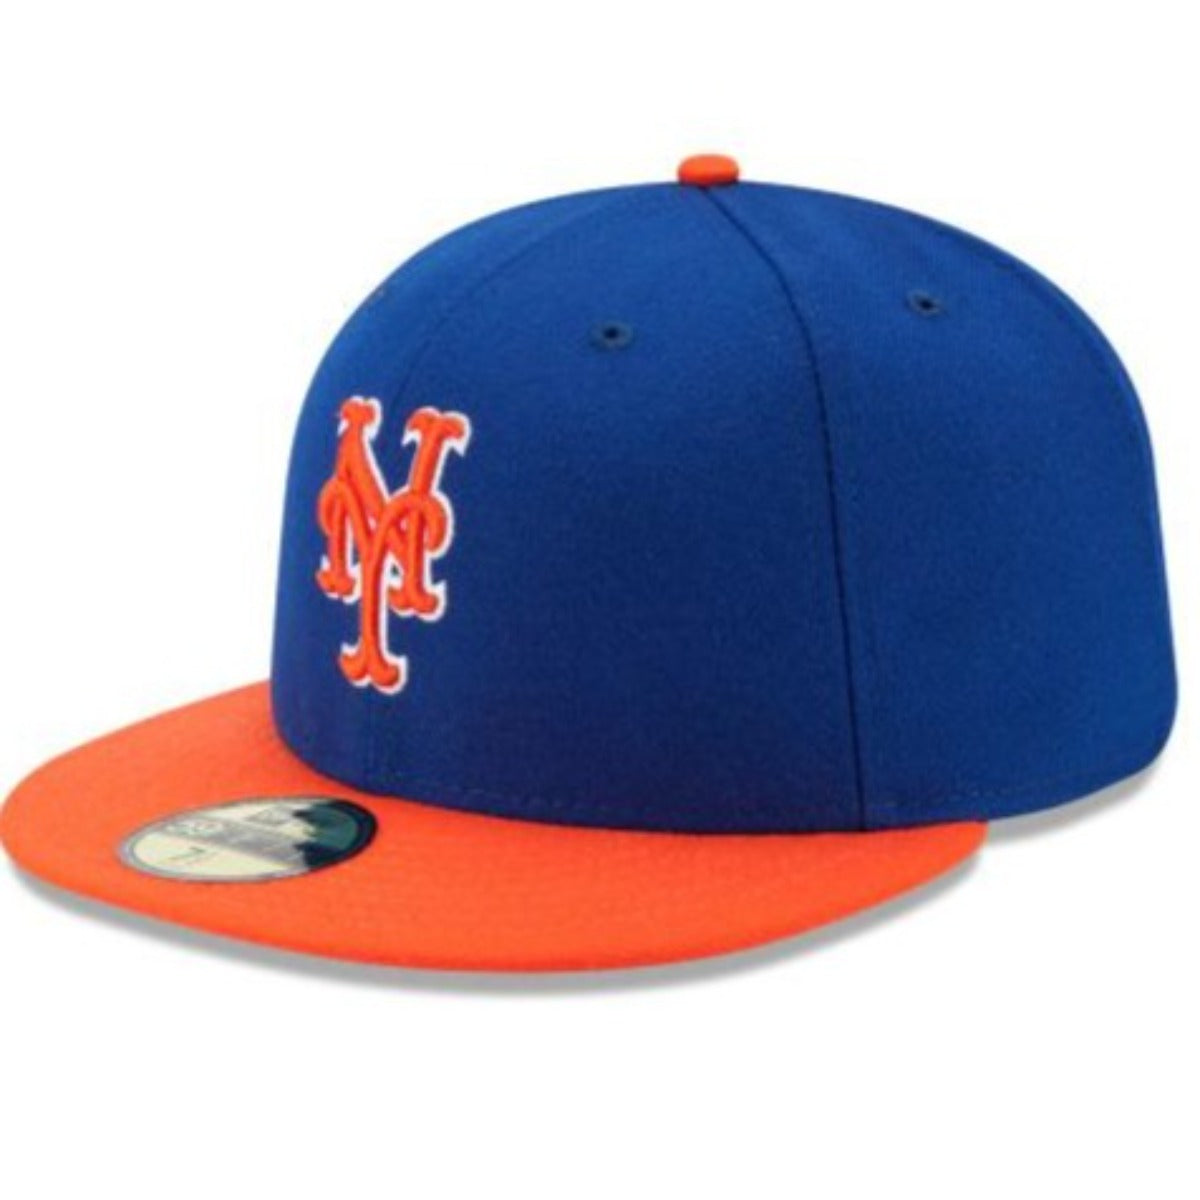 NEW YORK METS ALTERNATE COLLECTION 59FIFTY- Blue/Orange Nvsoccer.com Thecoliseum